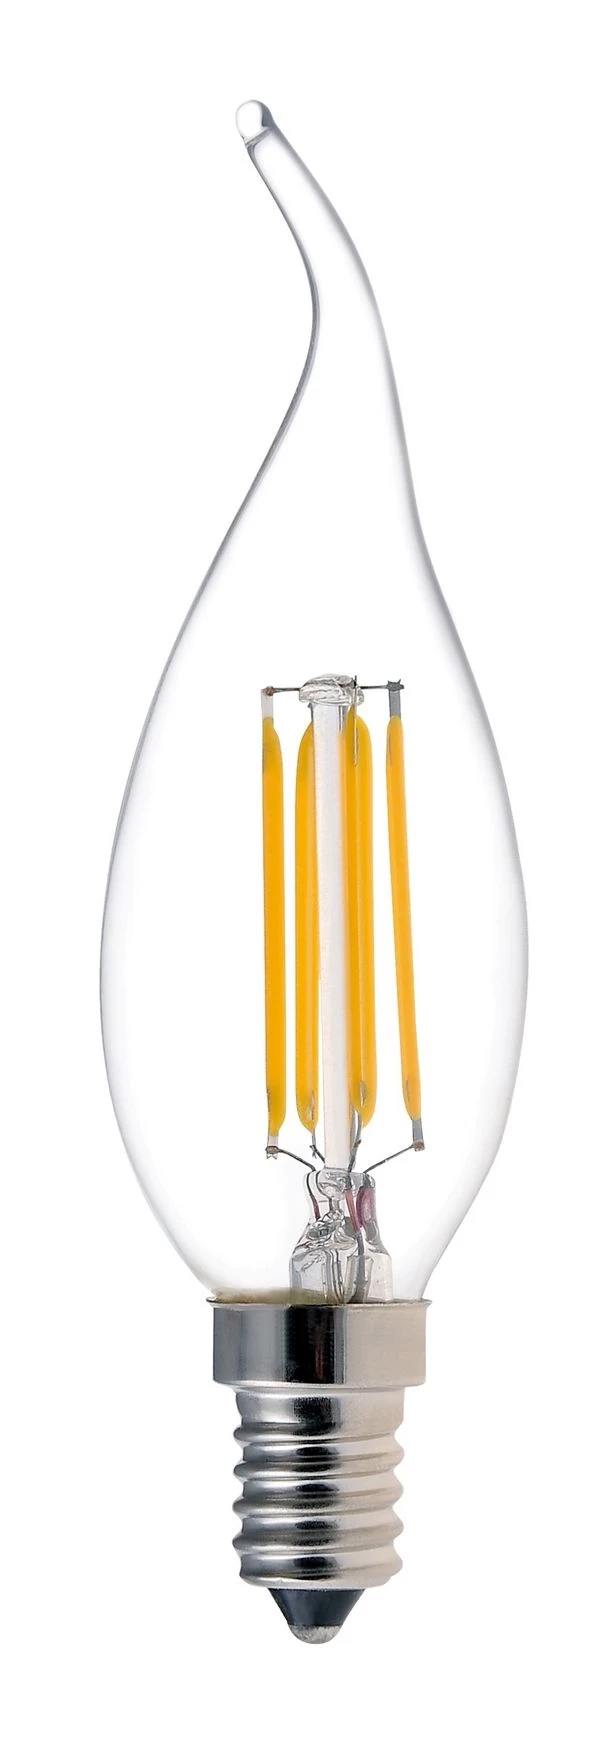 Tailed Candle LED filament bulbs from Innolite